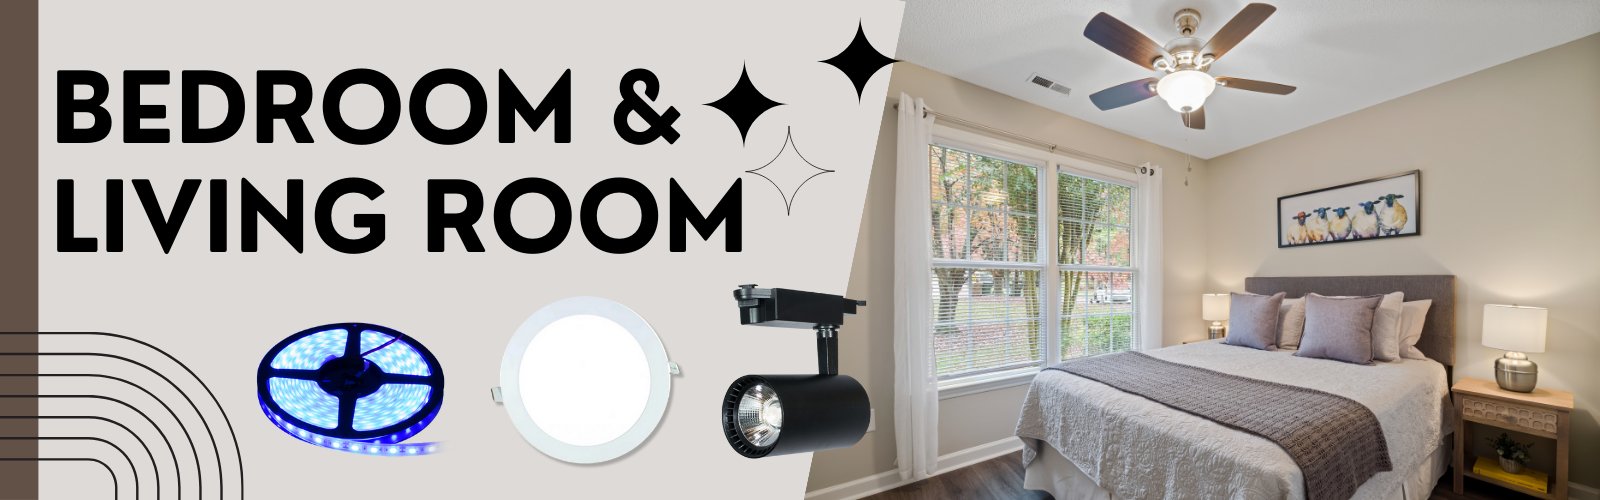 Bedroom and Living Room Ecoshift Shopify